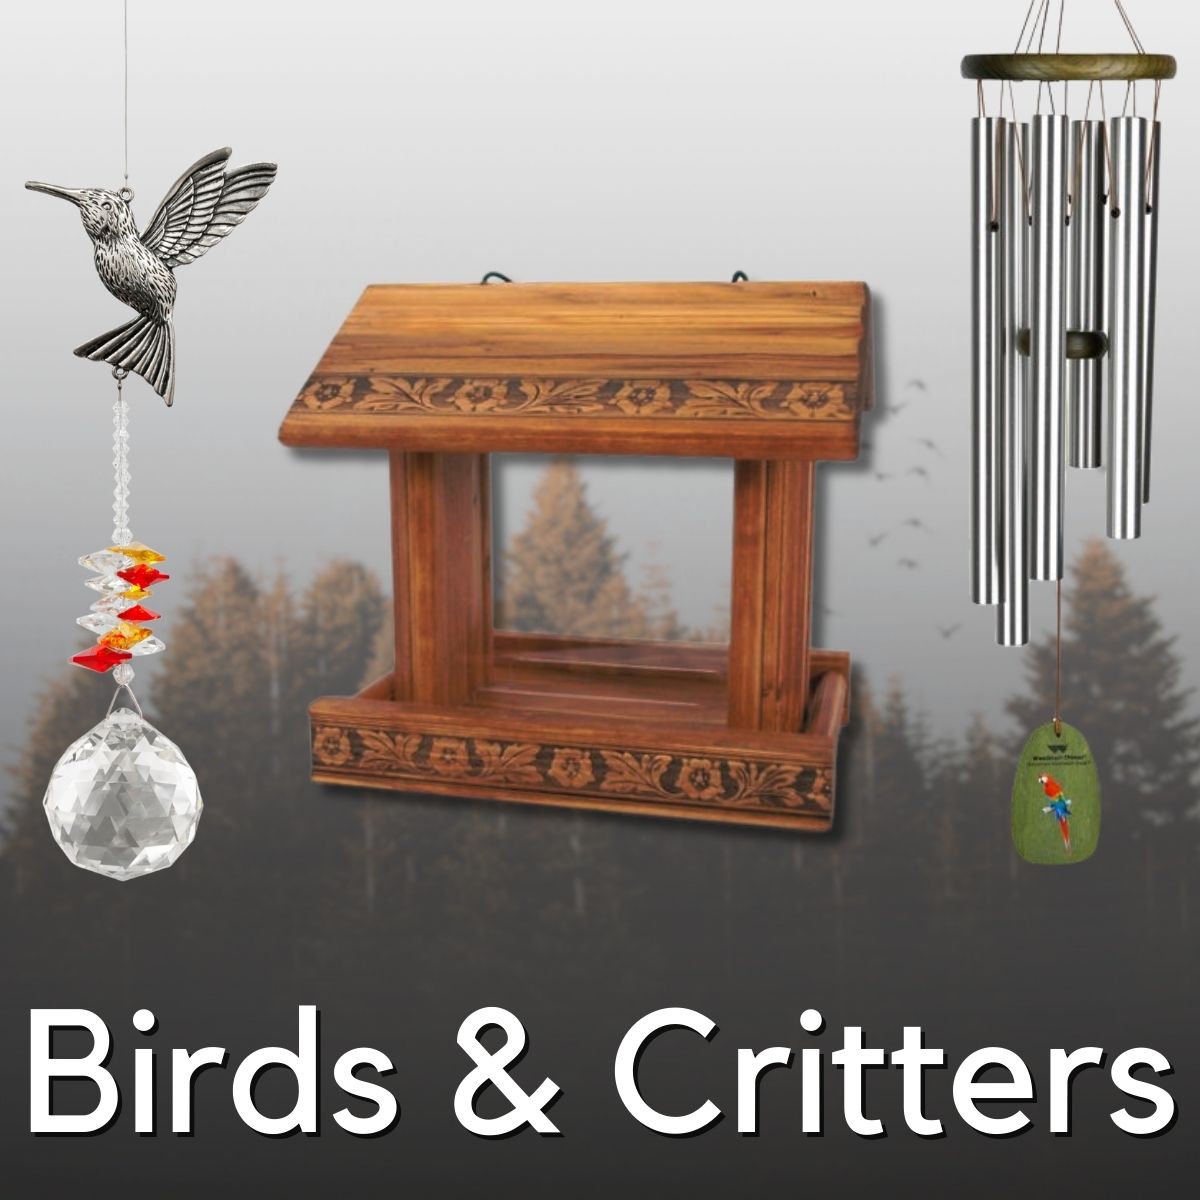 For Birds & Critters